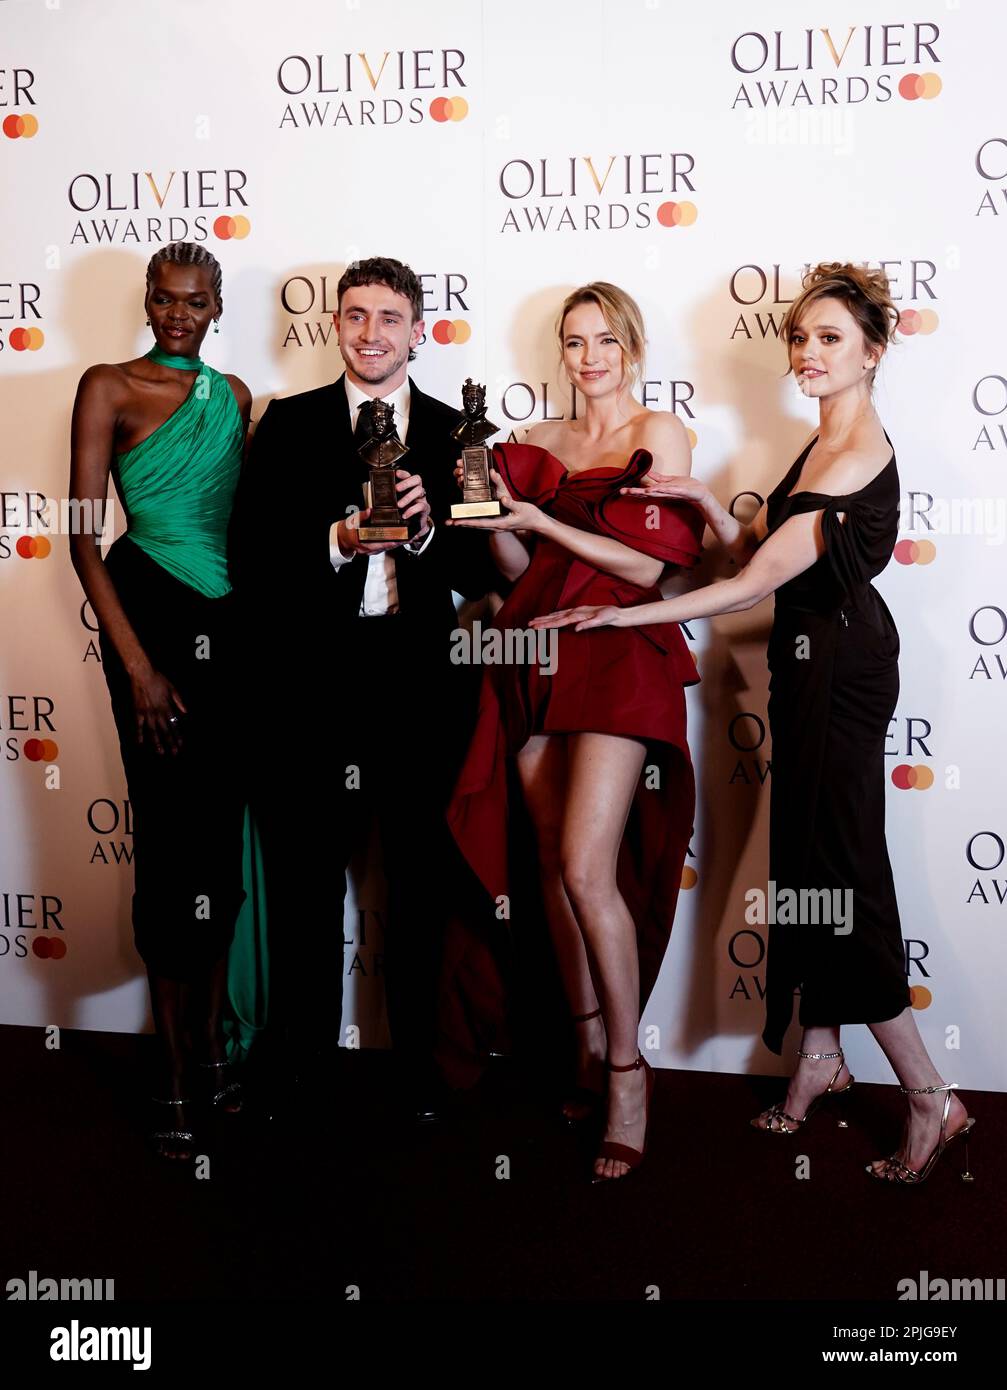 Award presenters Sheila Atim (left) and Aimee Lou Wood (right) pose for a photo in the press room alongside Best Actor winner Paul Mescal and Best Actress winner Jodie Comer at the Olivier Awards held at the Royal Albert Hall, London. Picture date: Sunday April 2, 2023. Stock Photo